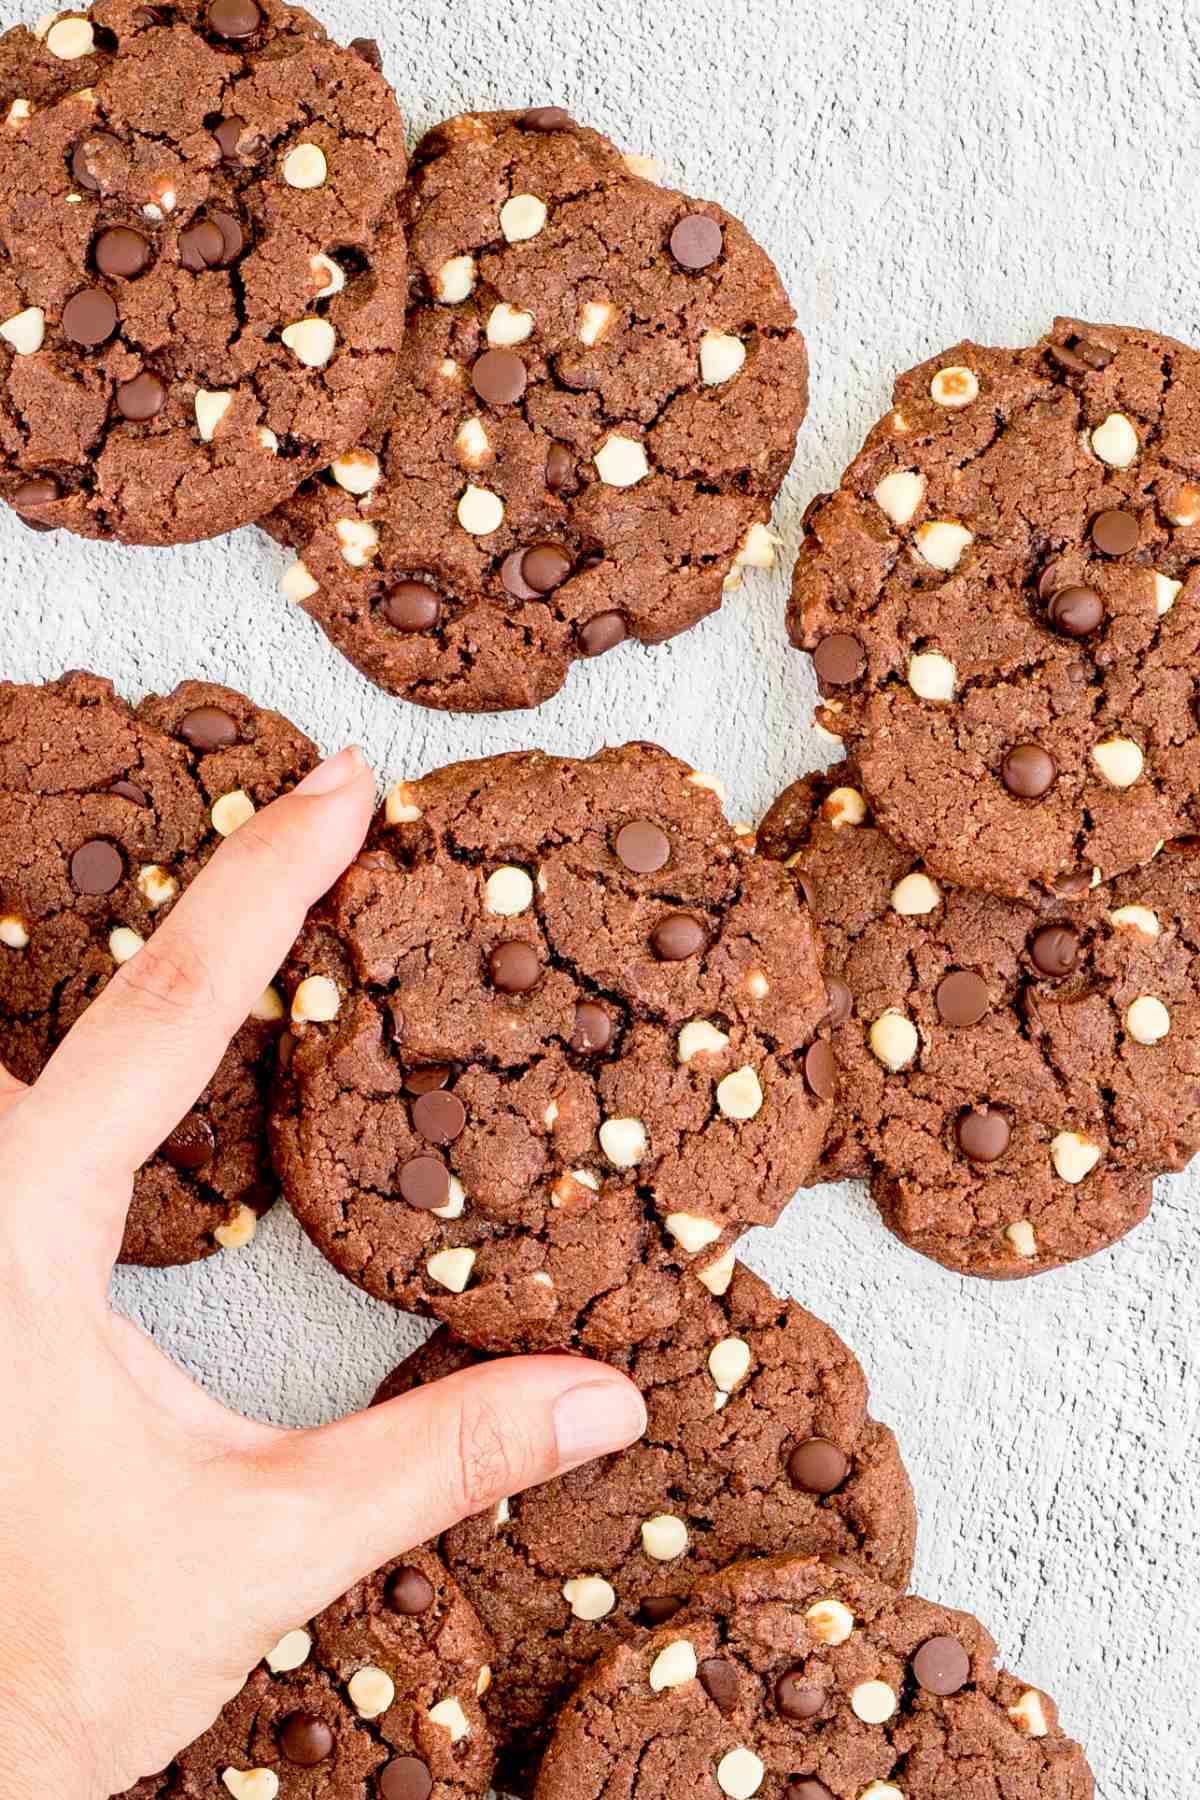 Dark brown cookies with white and dark chocolate chips on a white surface. A hand is taking one from the middle.